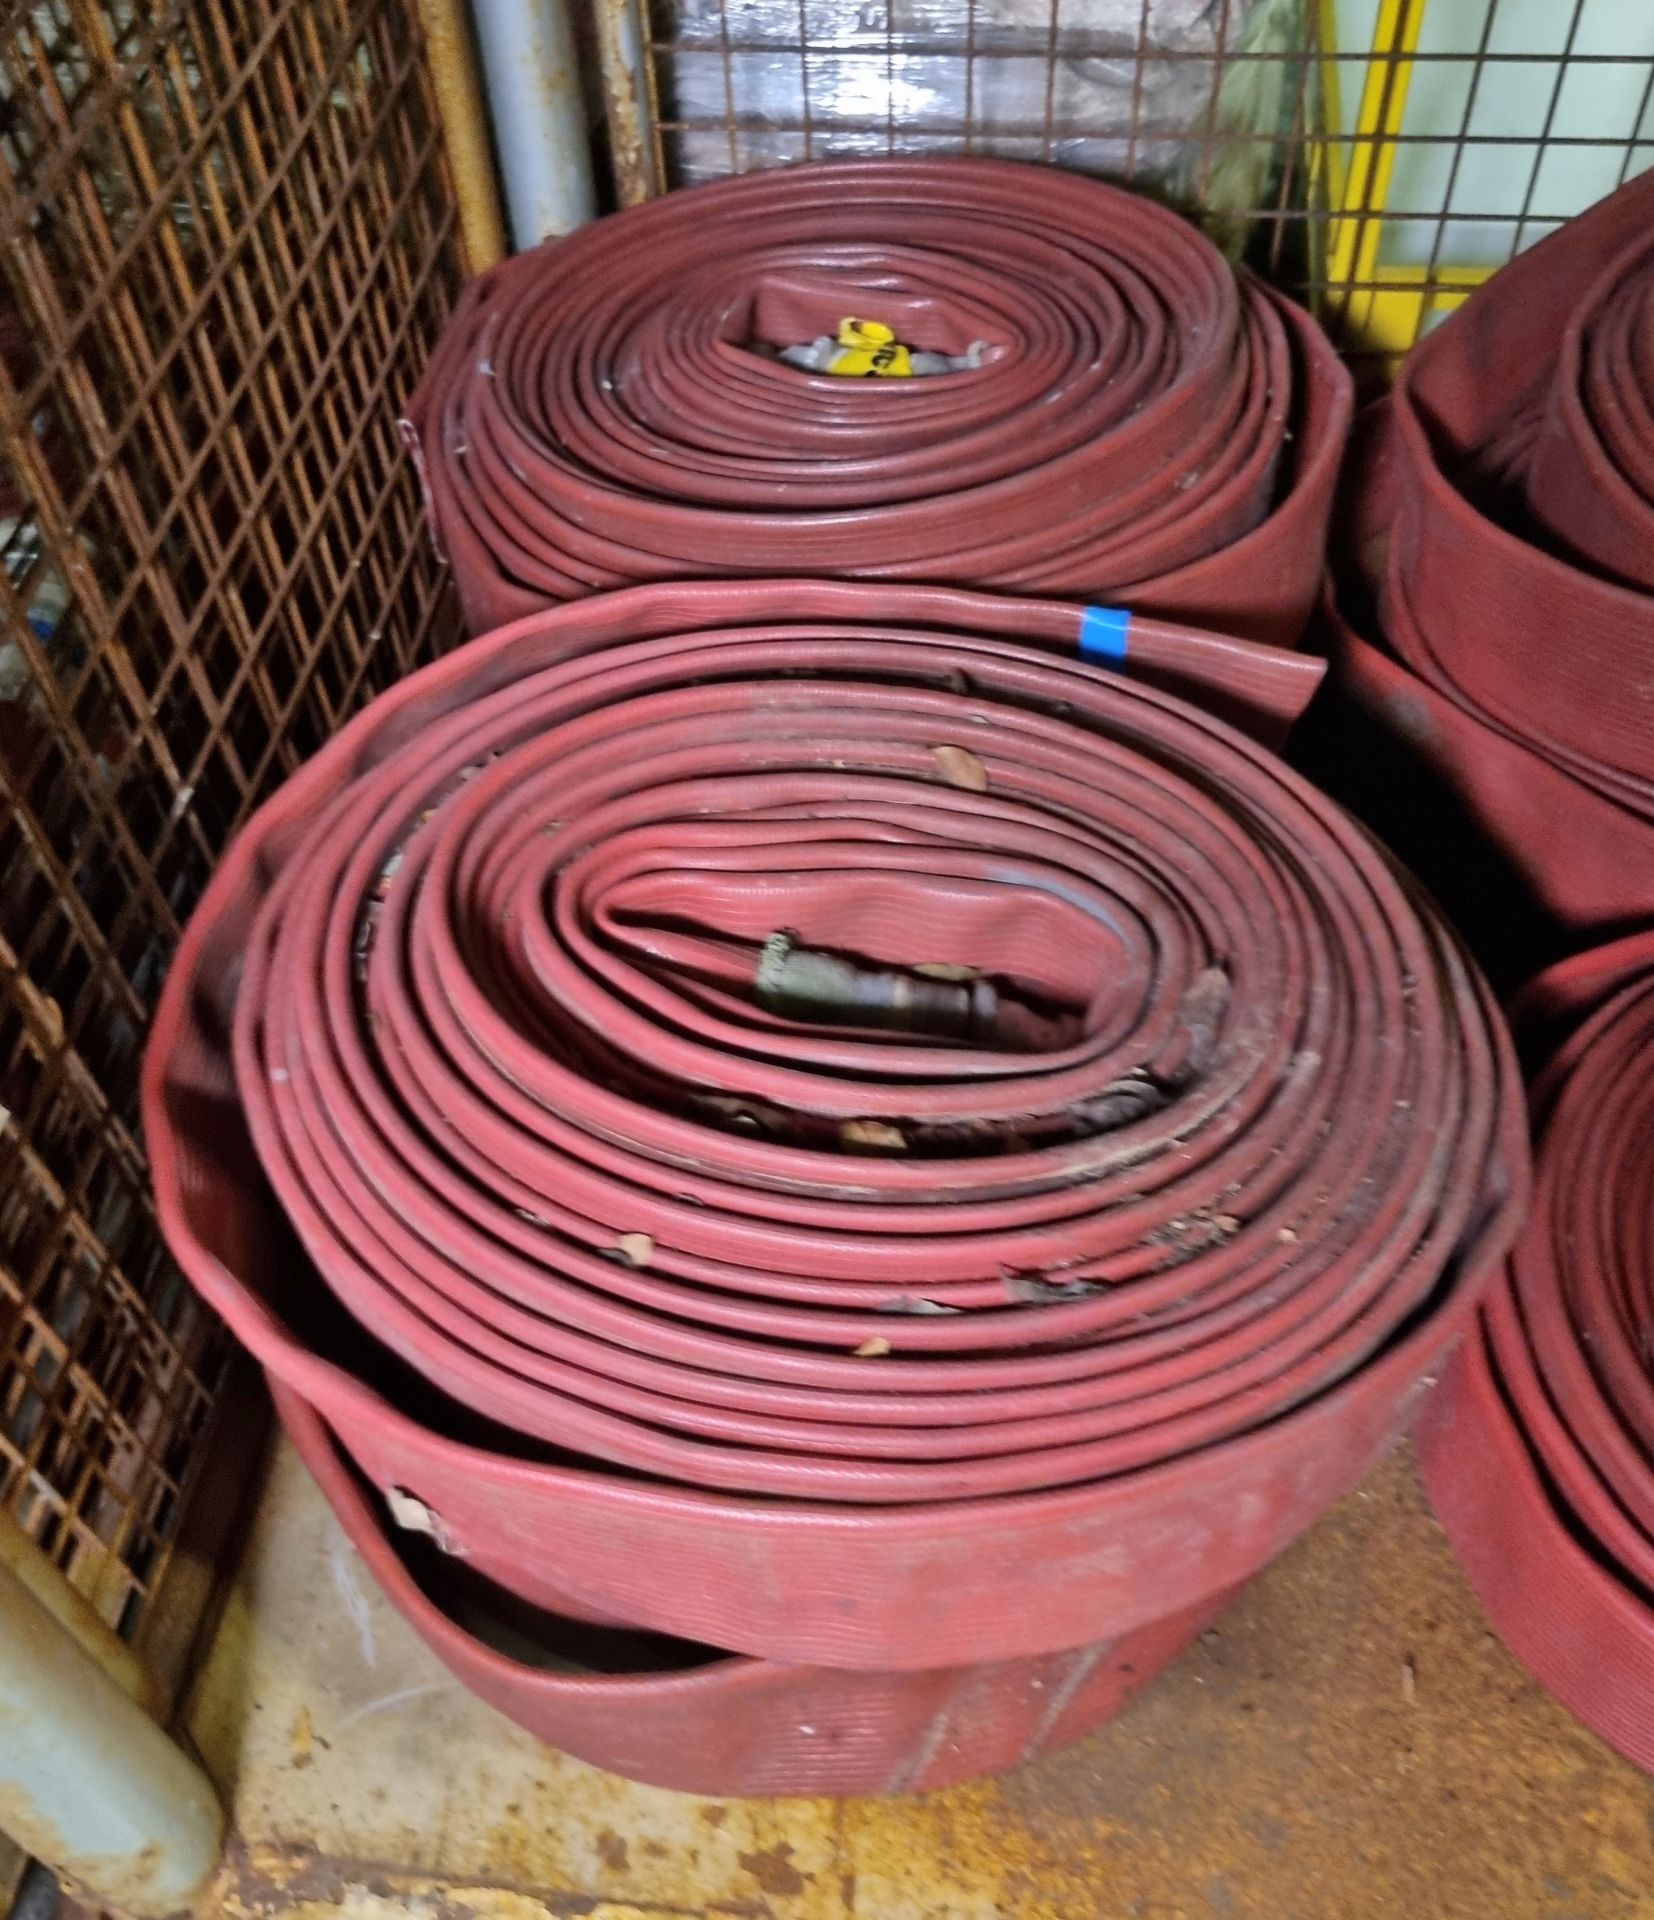 8x Angus Duraline 70mm lay flat hoses with single coupling - approx 20m in length - Image 4 of 4